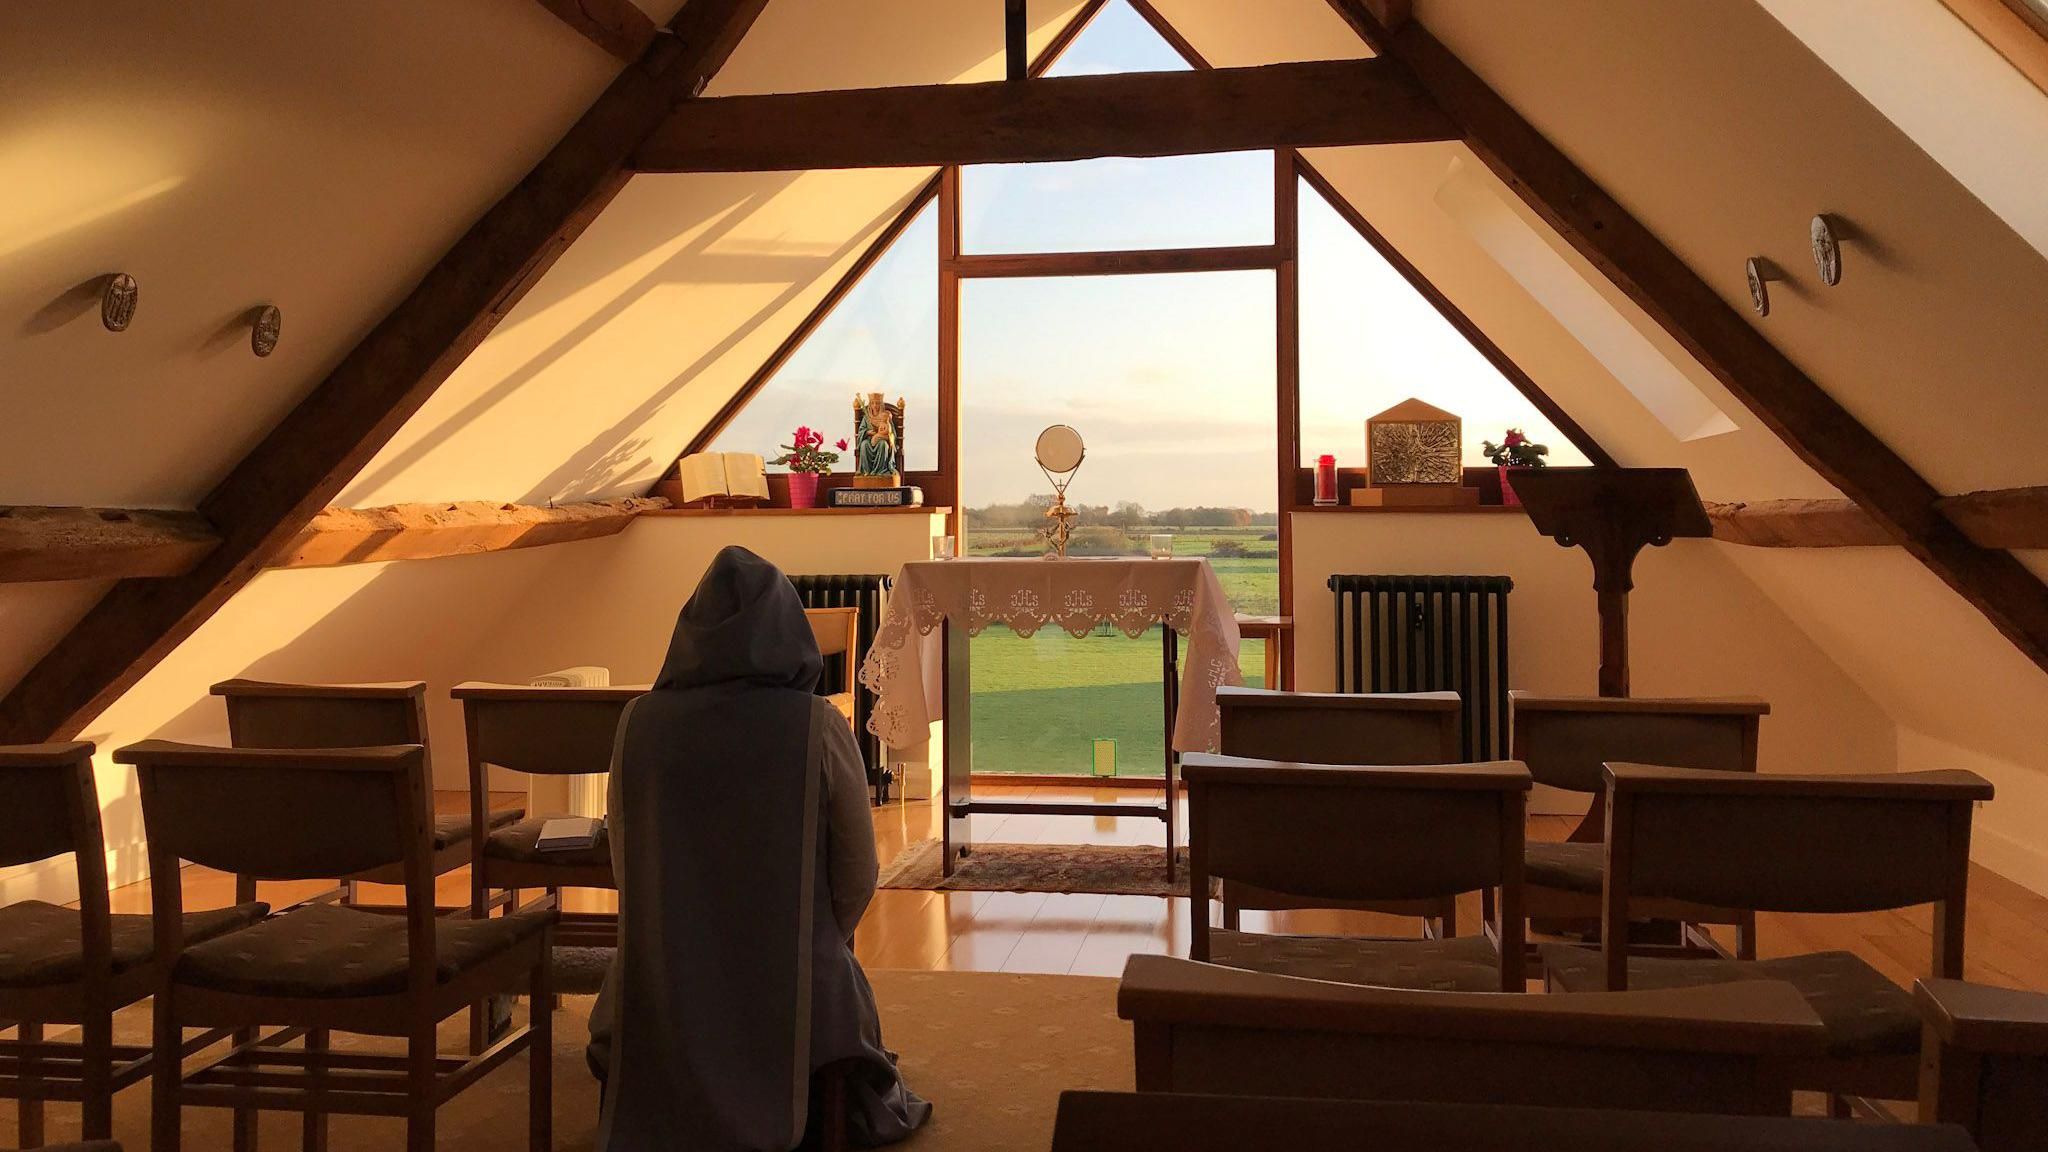 A sister praying in the convent chapel